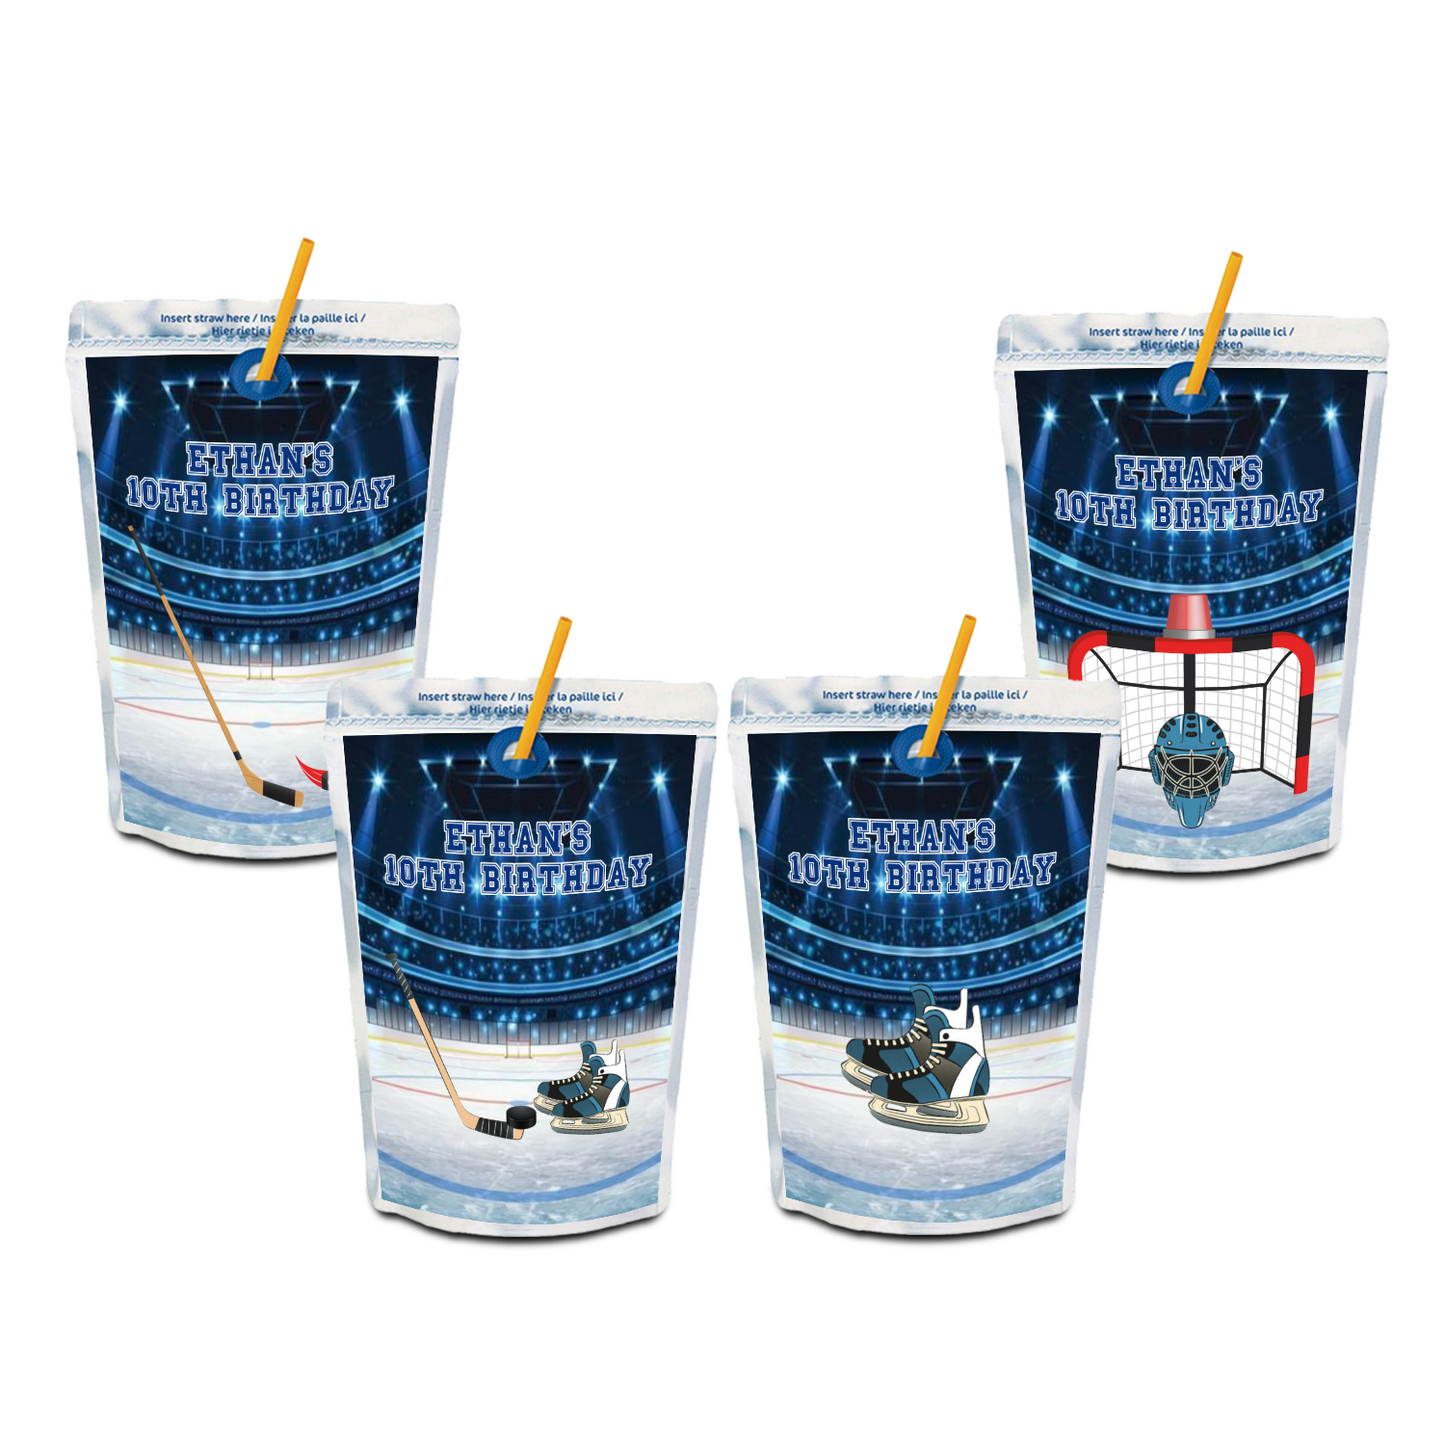 Caprisun label or juice pouch label adorned with a customized Hockey theme.